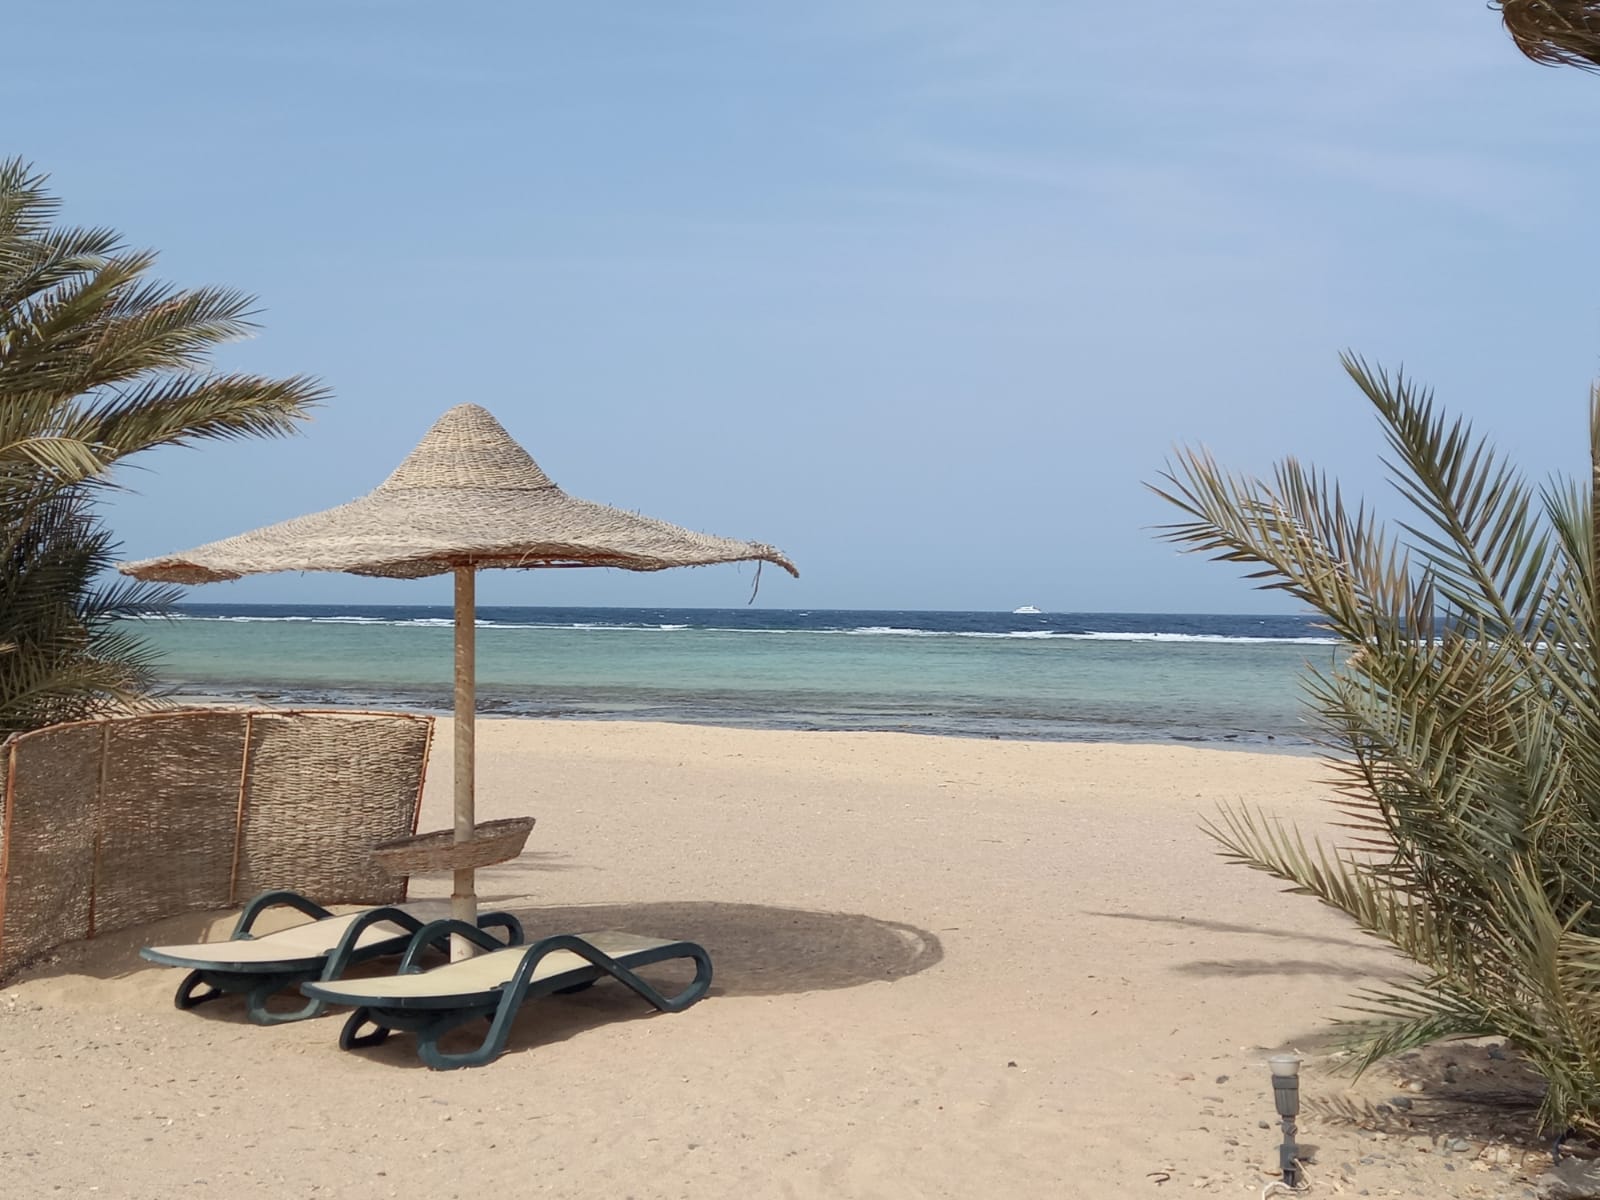 The Pearl of the South – Shoni Bay north of Marsa Alam